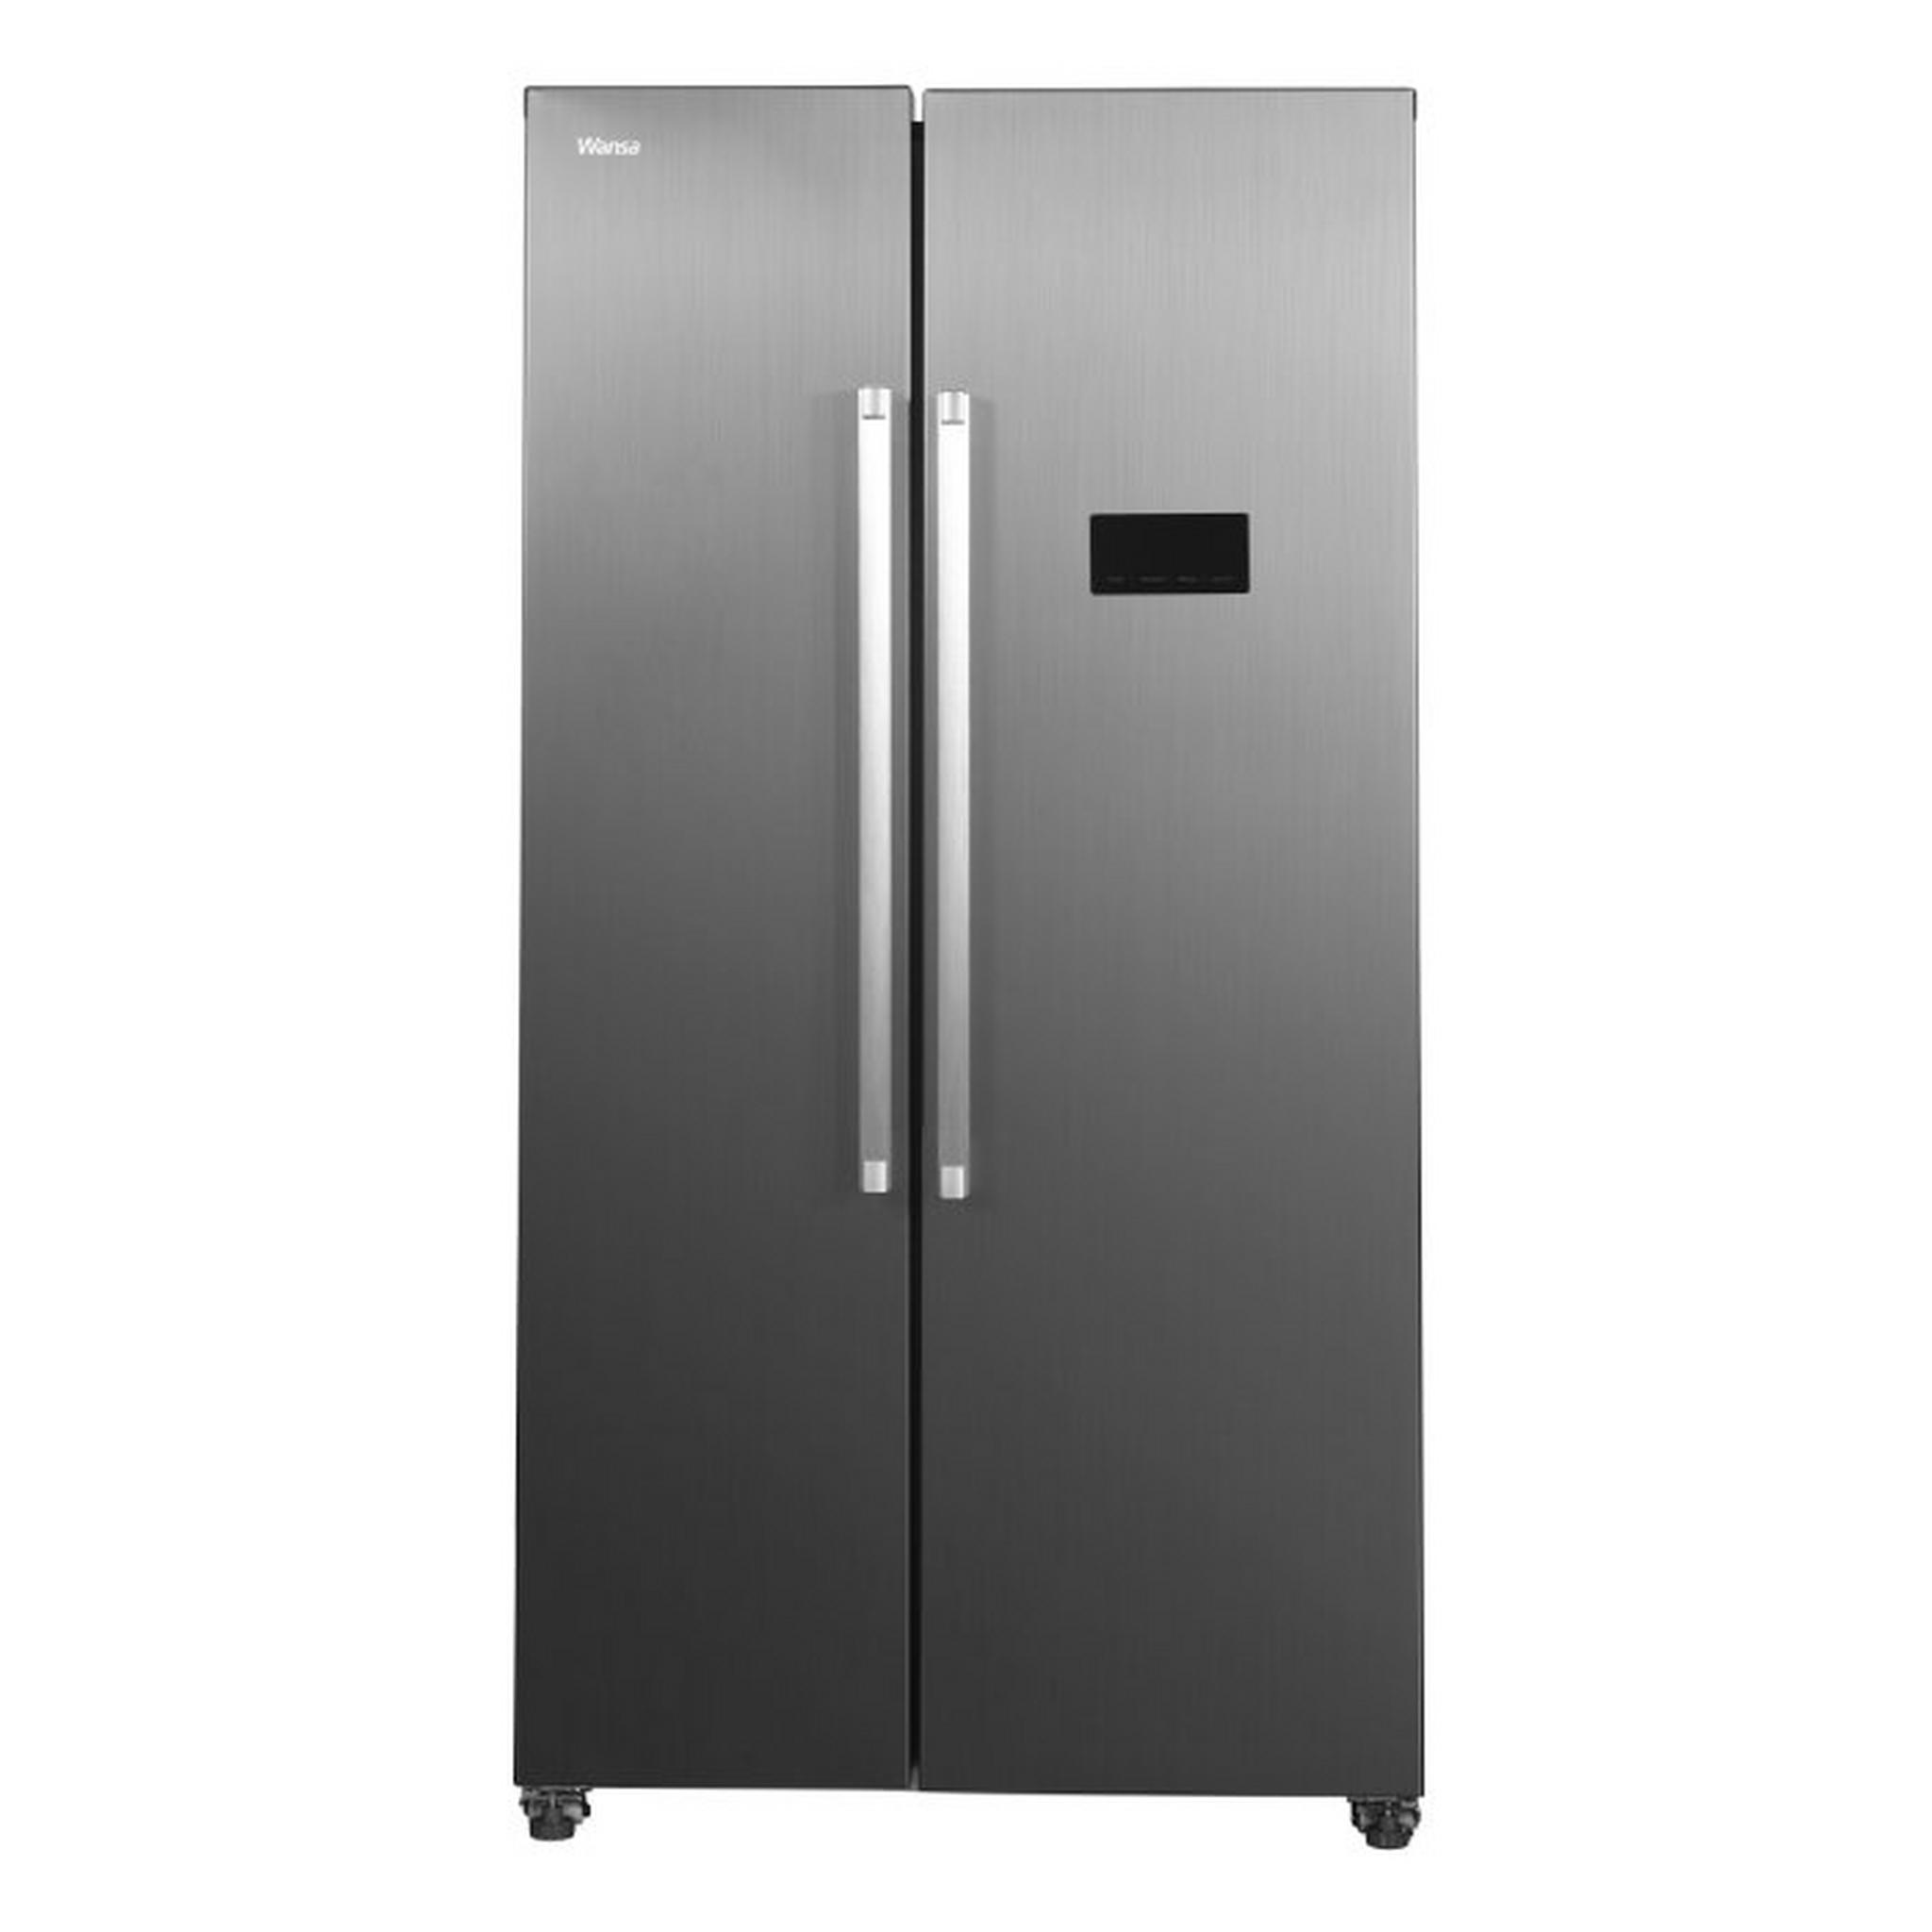 Wansa 20 CFT Side By Side Refrigerator and Freezer Price in Kuwait ...